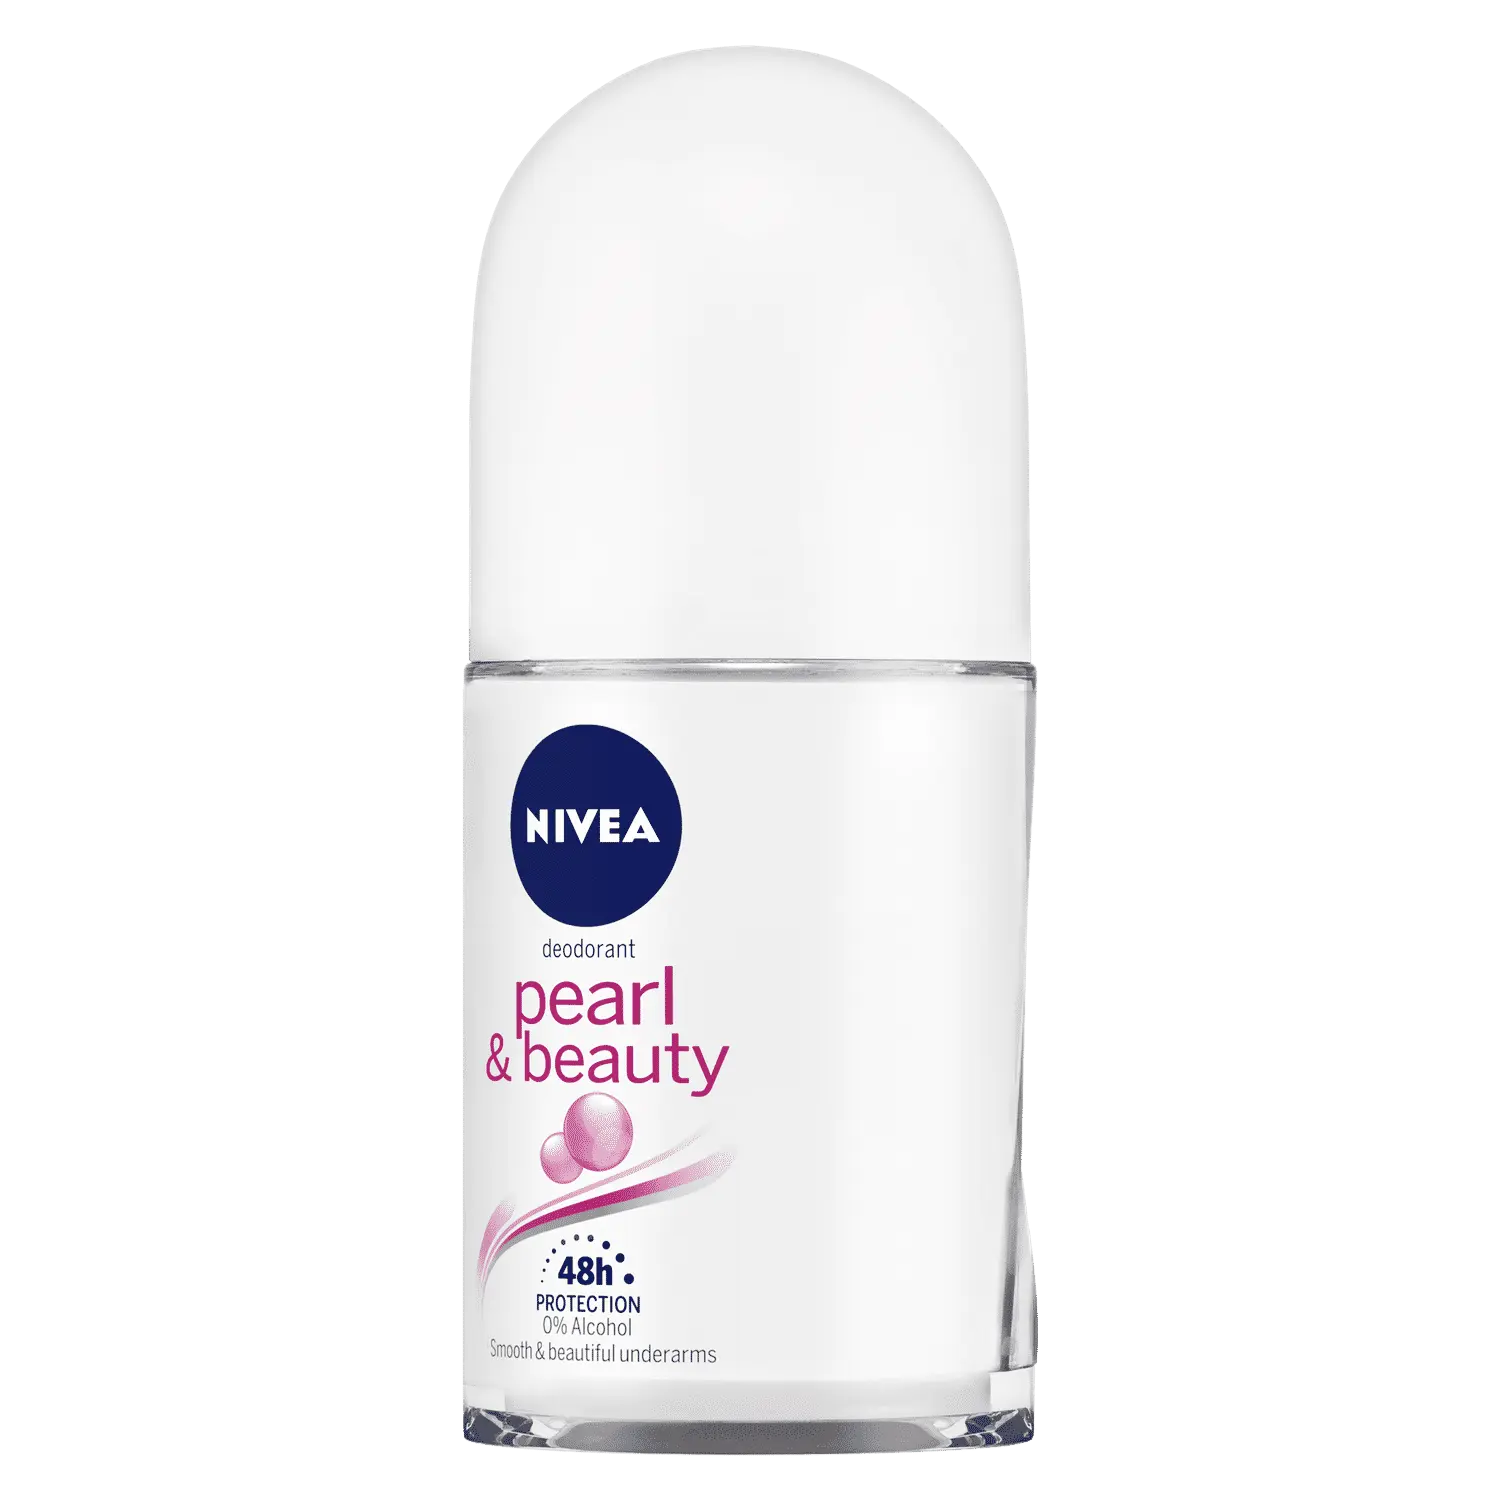 Nivea Deo Roll-on- Pearl extracts & 0% Alcohol, for Smooth Underarms, 48H freshness and odour protection